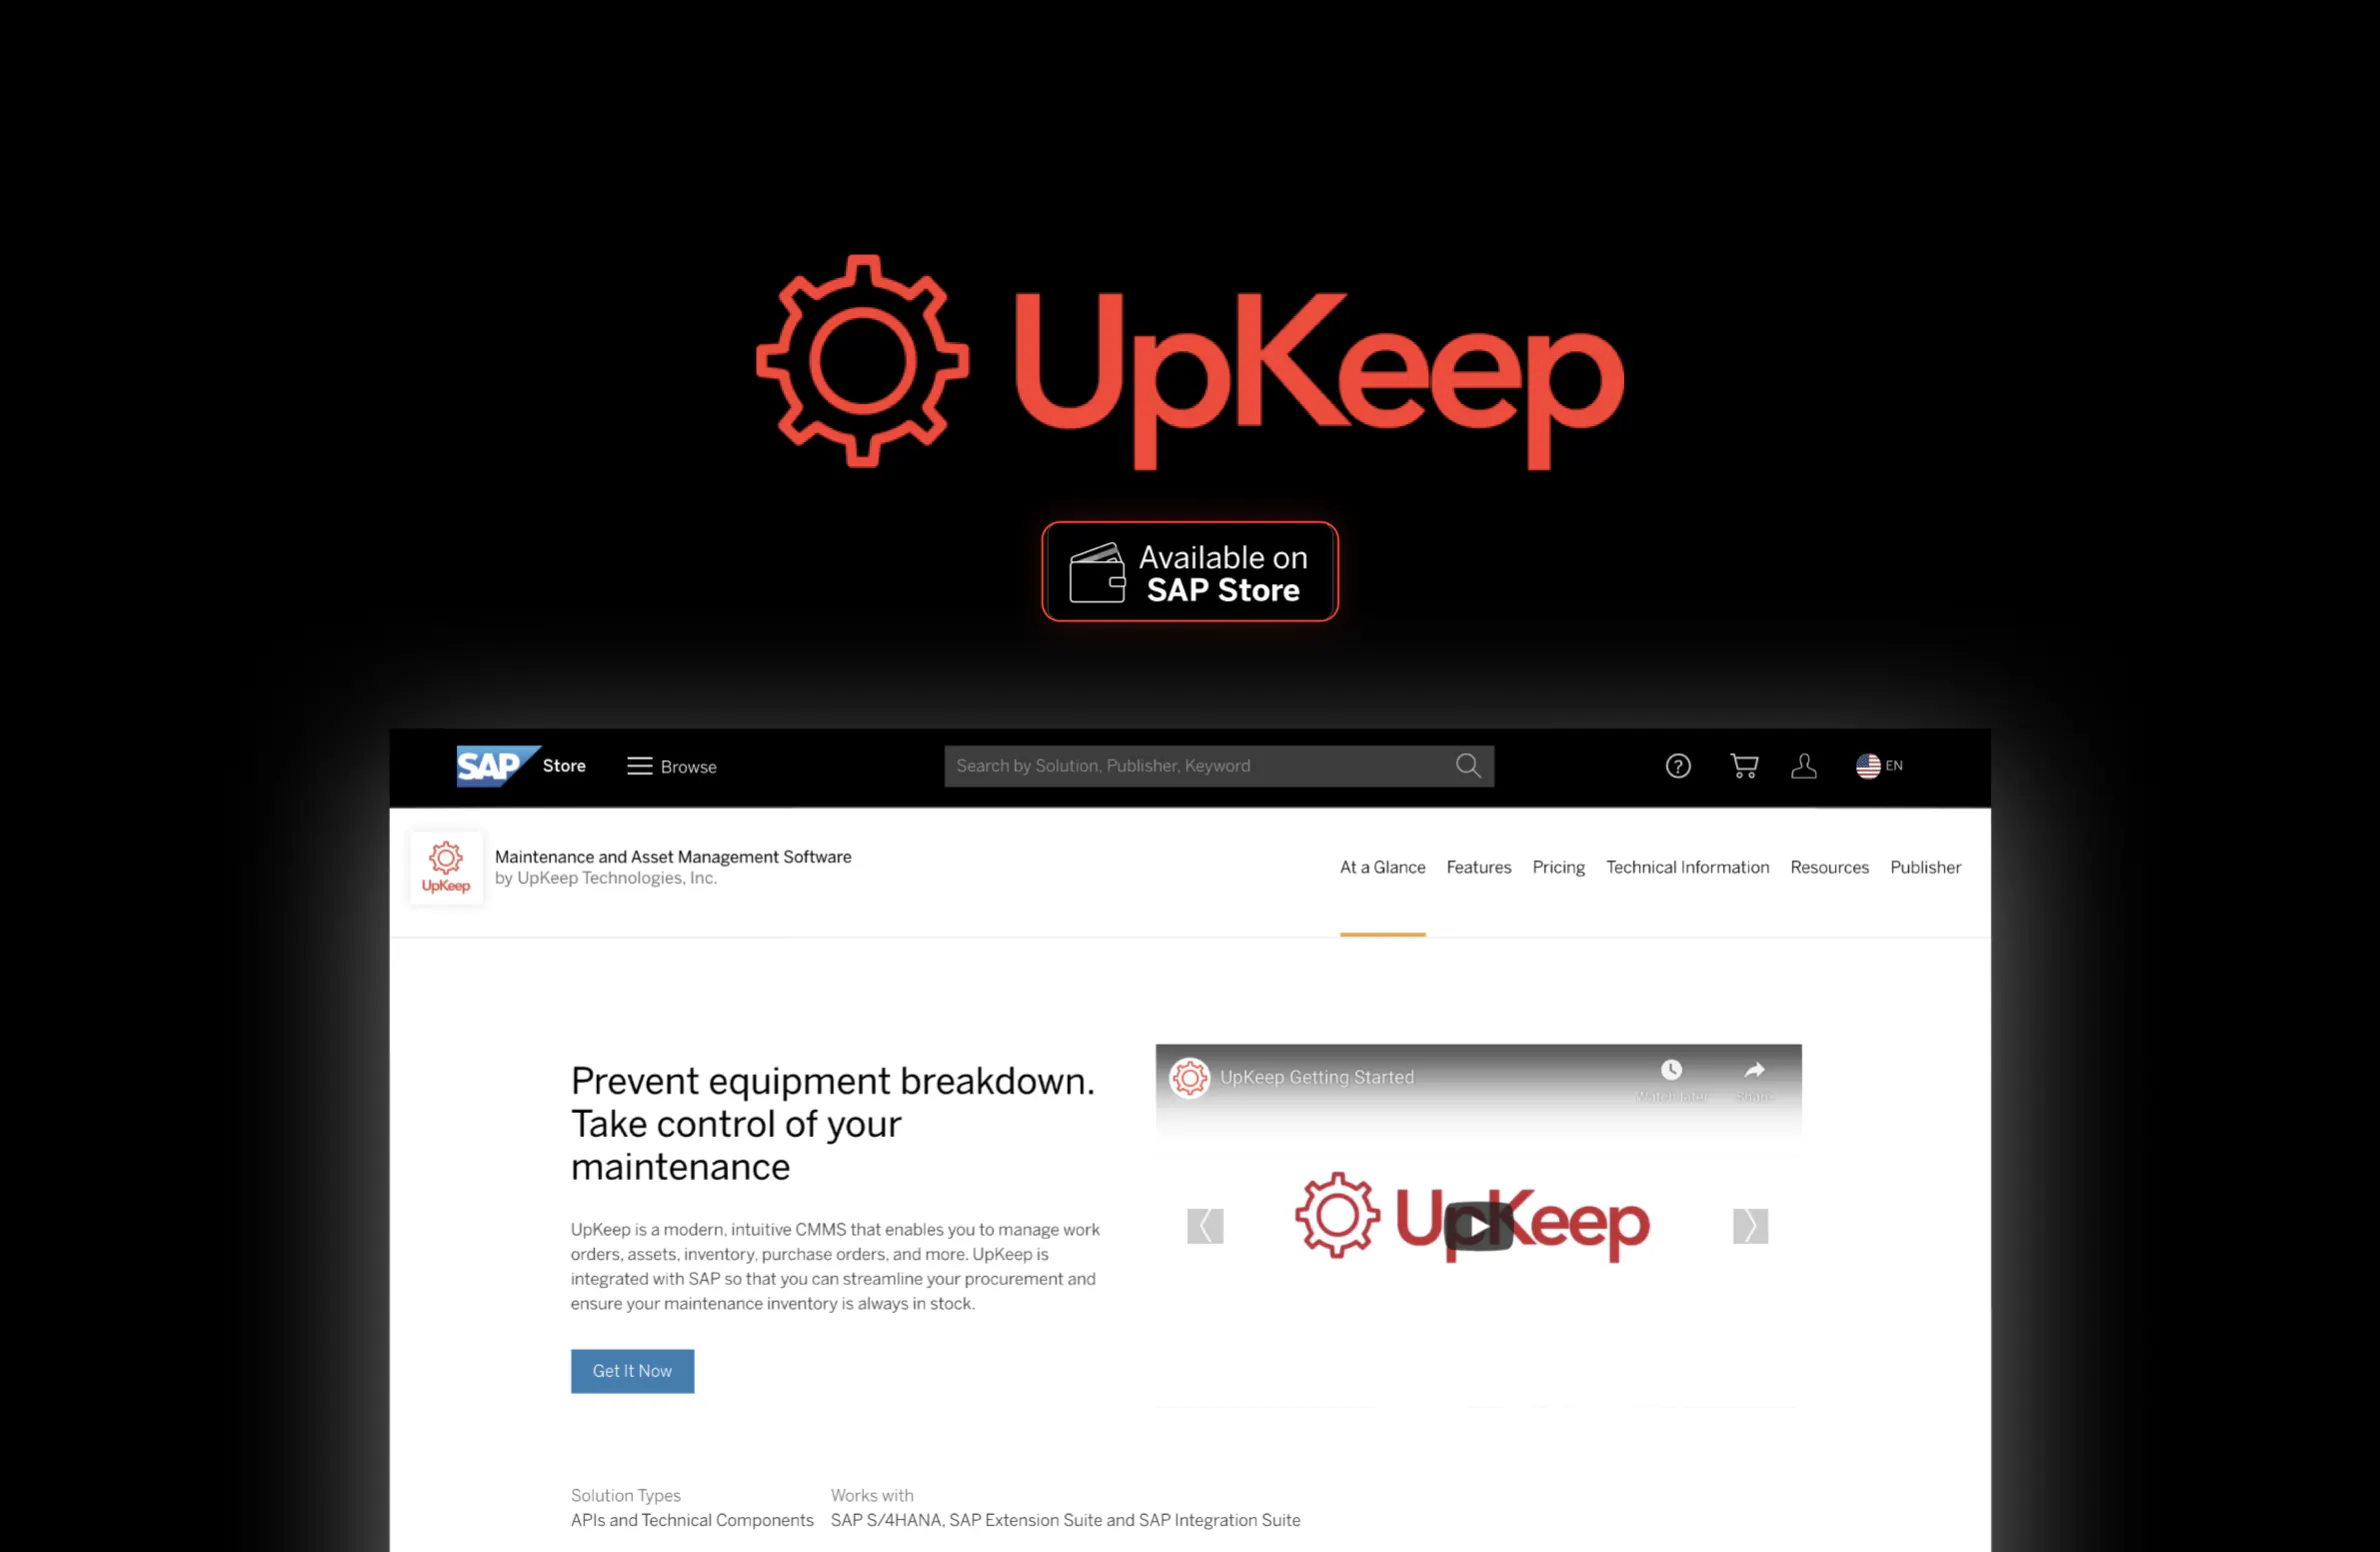 Maintenance and Asset Management Software from UpKeep Now Available on SAP® Store